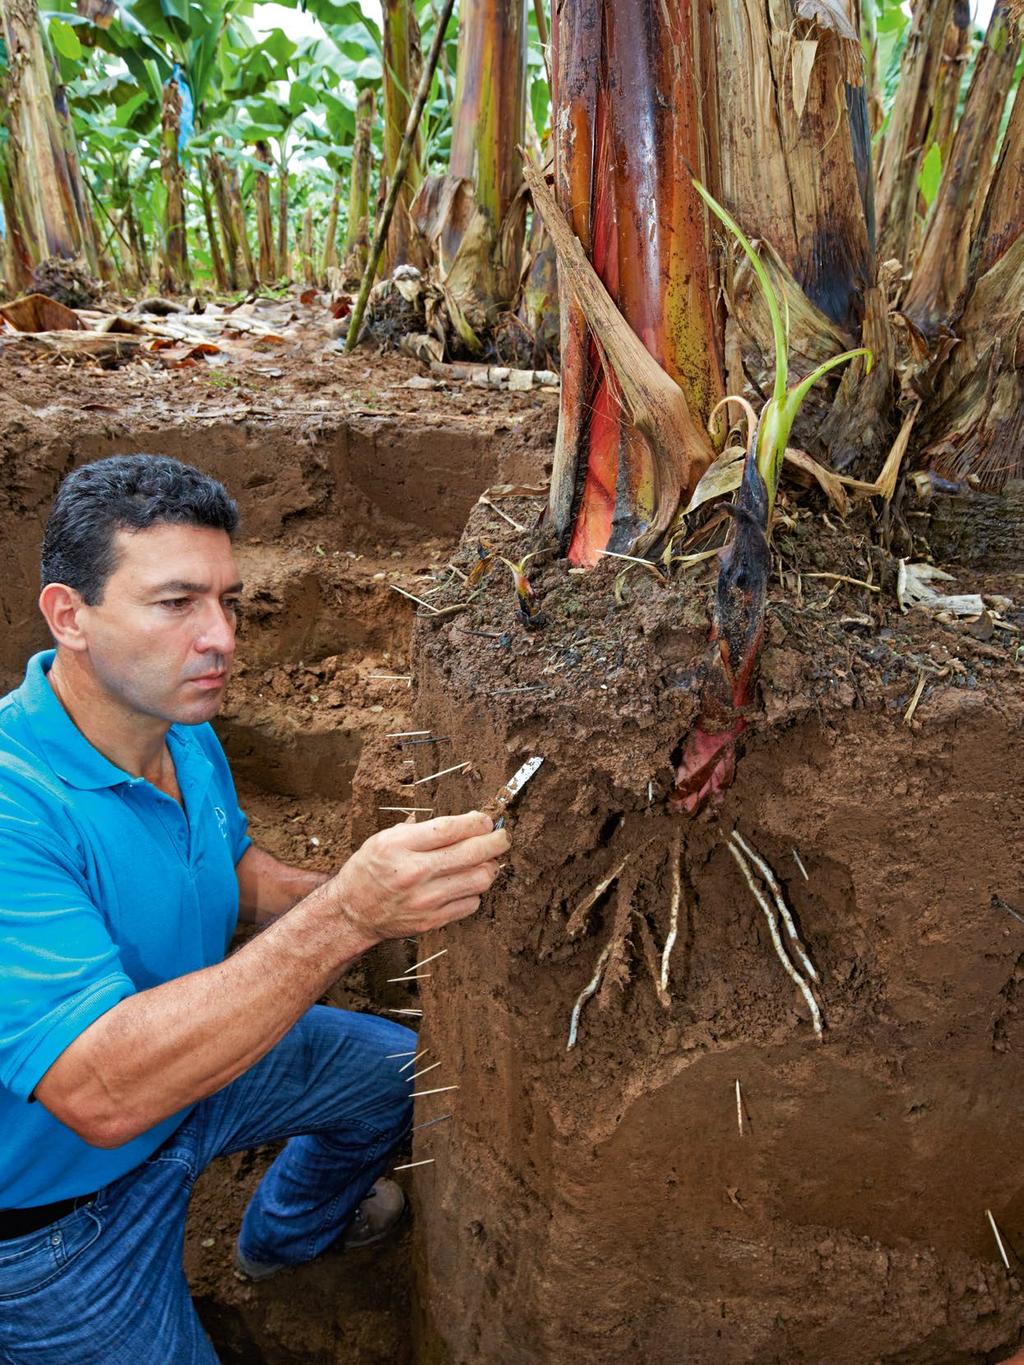 The earth from below: agricultural engineer Rodolfo Ceciliano Solis uses his penknife to check the roots